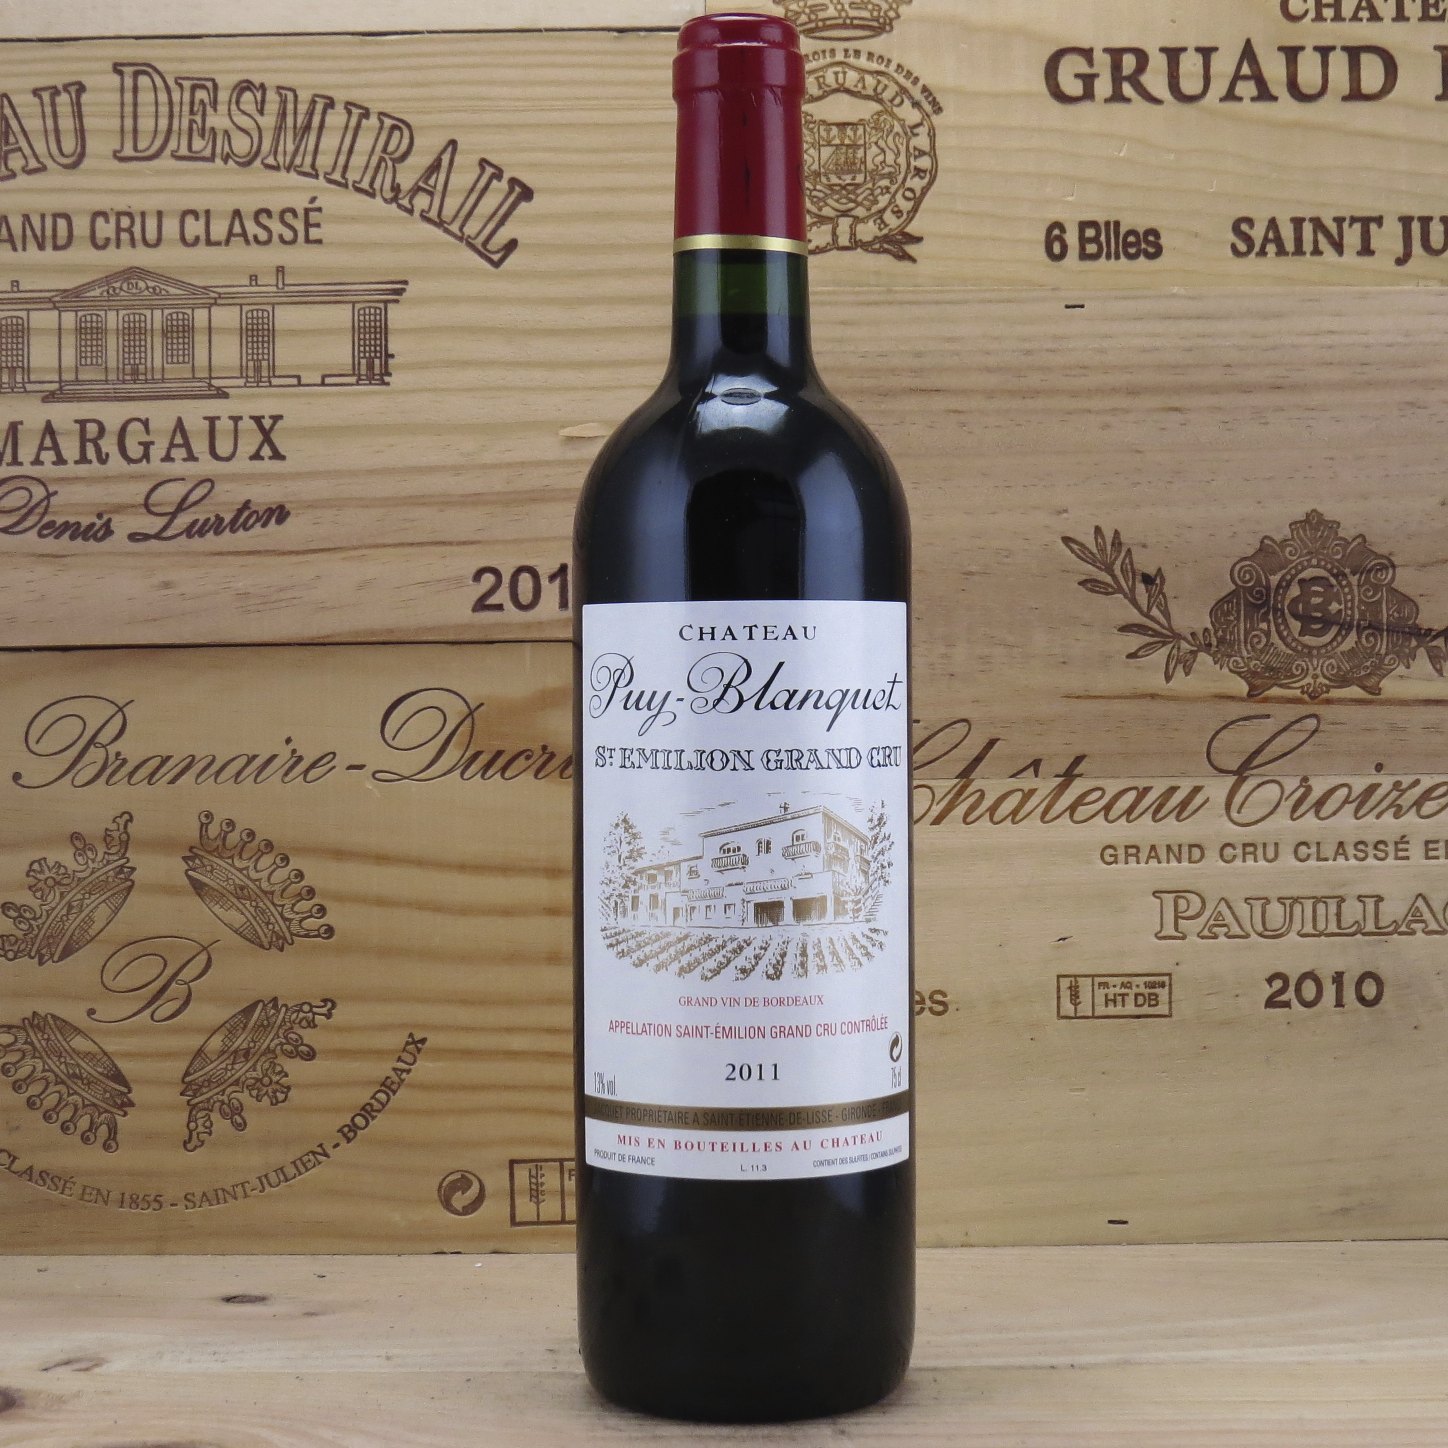 2011 Chateau Puy Blanquet